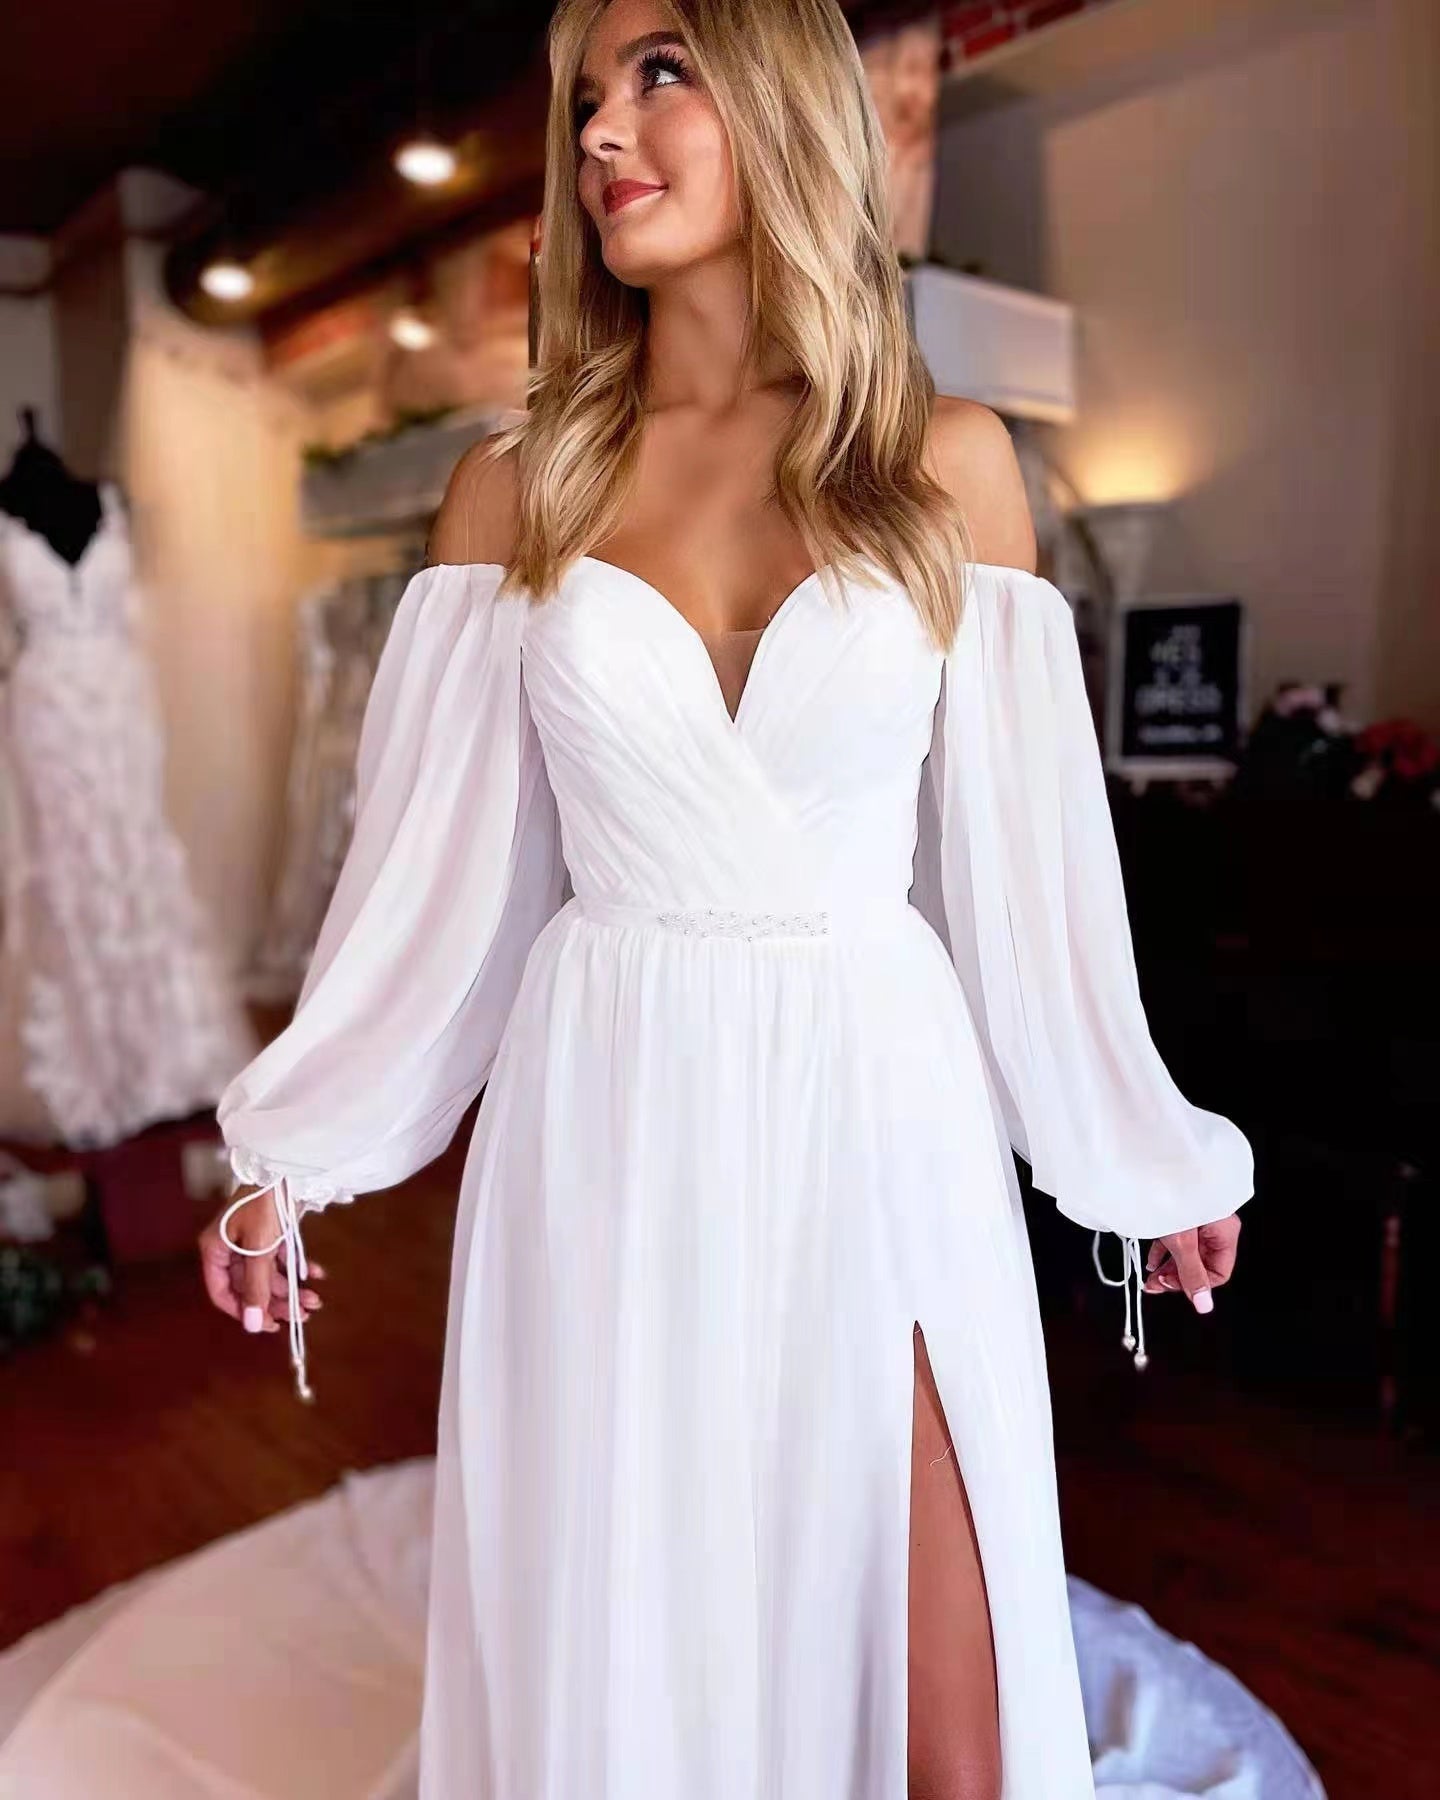 Off The Shoulder Long Sleeves Wedding Dresses, 2022 Simple Wedding Gowns, Newest Long Prom Dresses